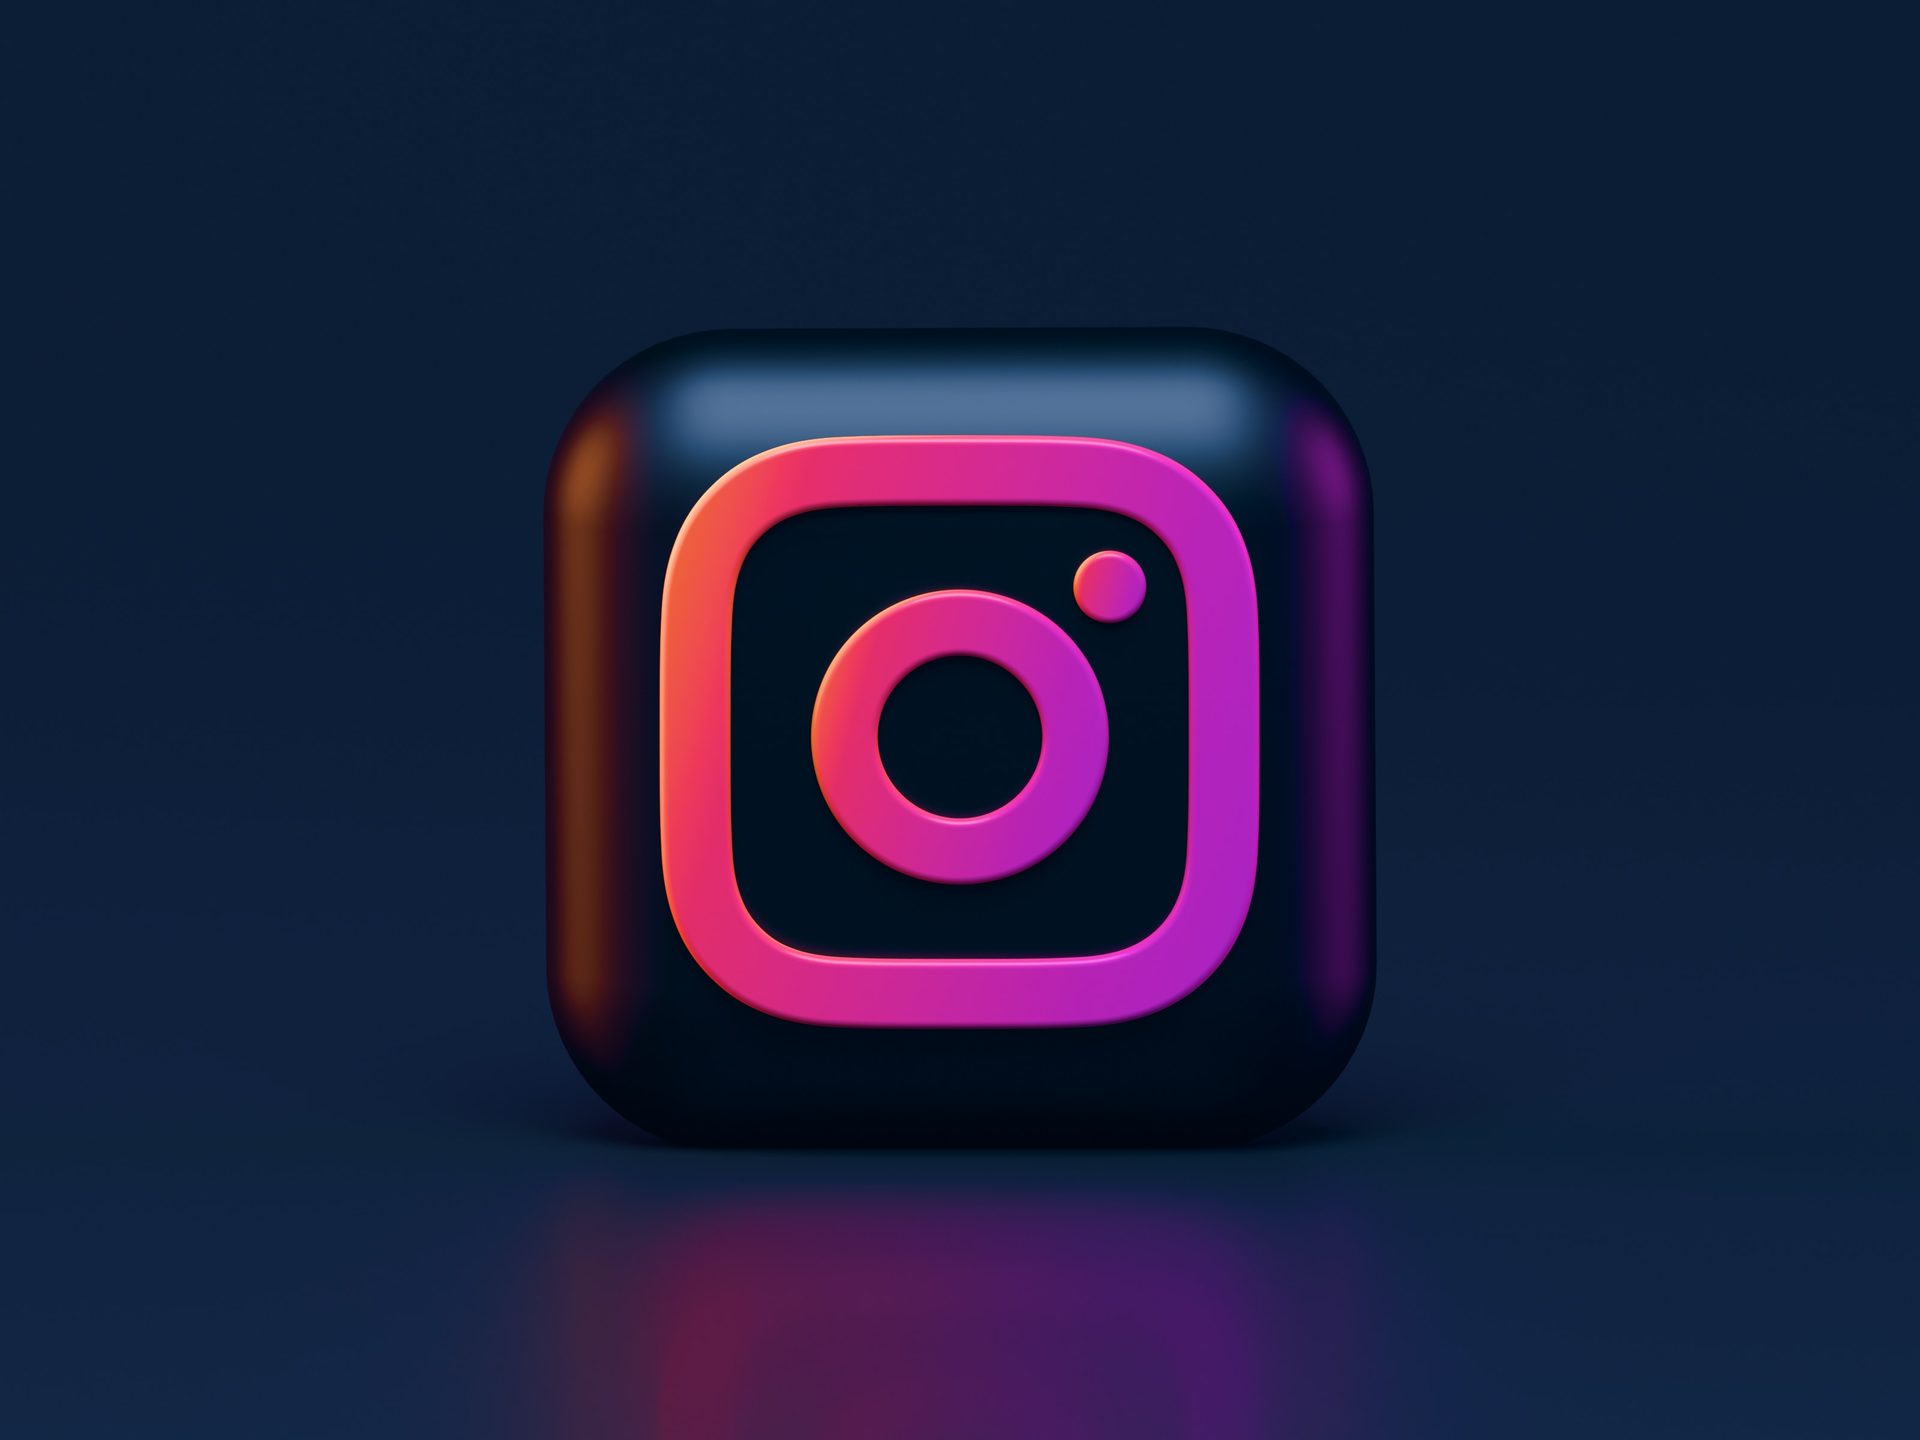 Is Instagram not working? Learn how to fix Instagram not working issues and common Instagram error. Plus, there are alternatives to try right now!